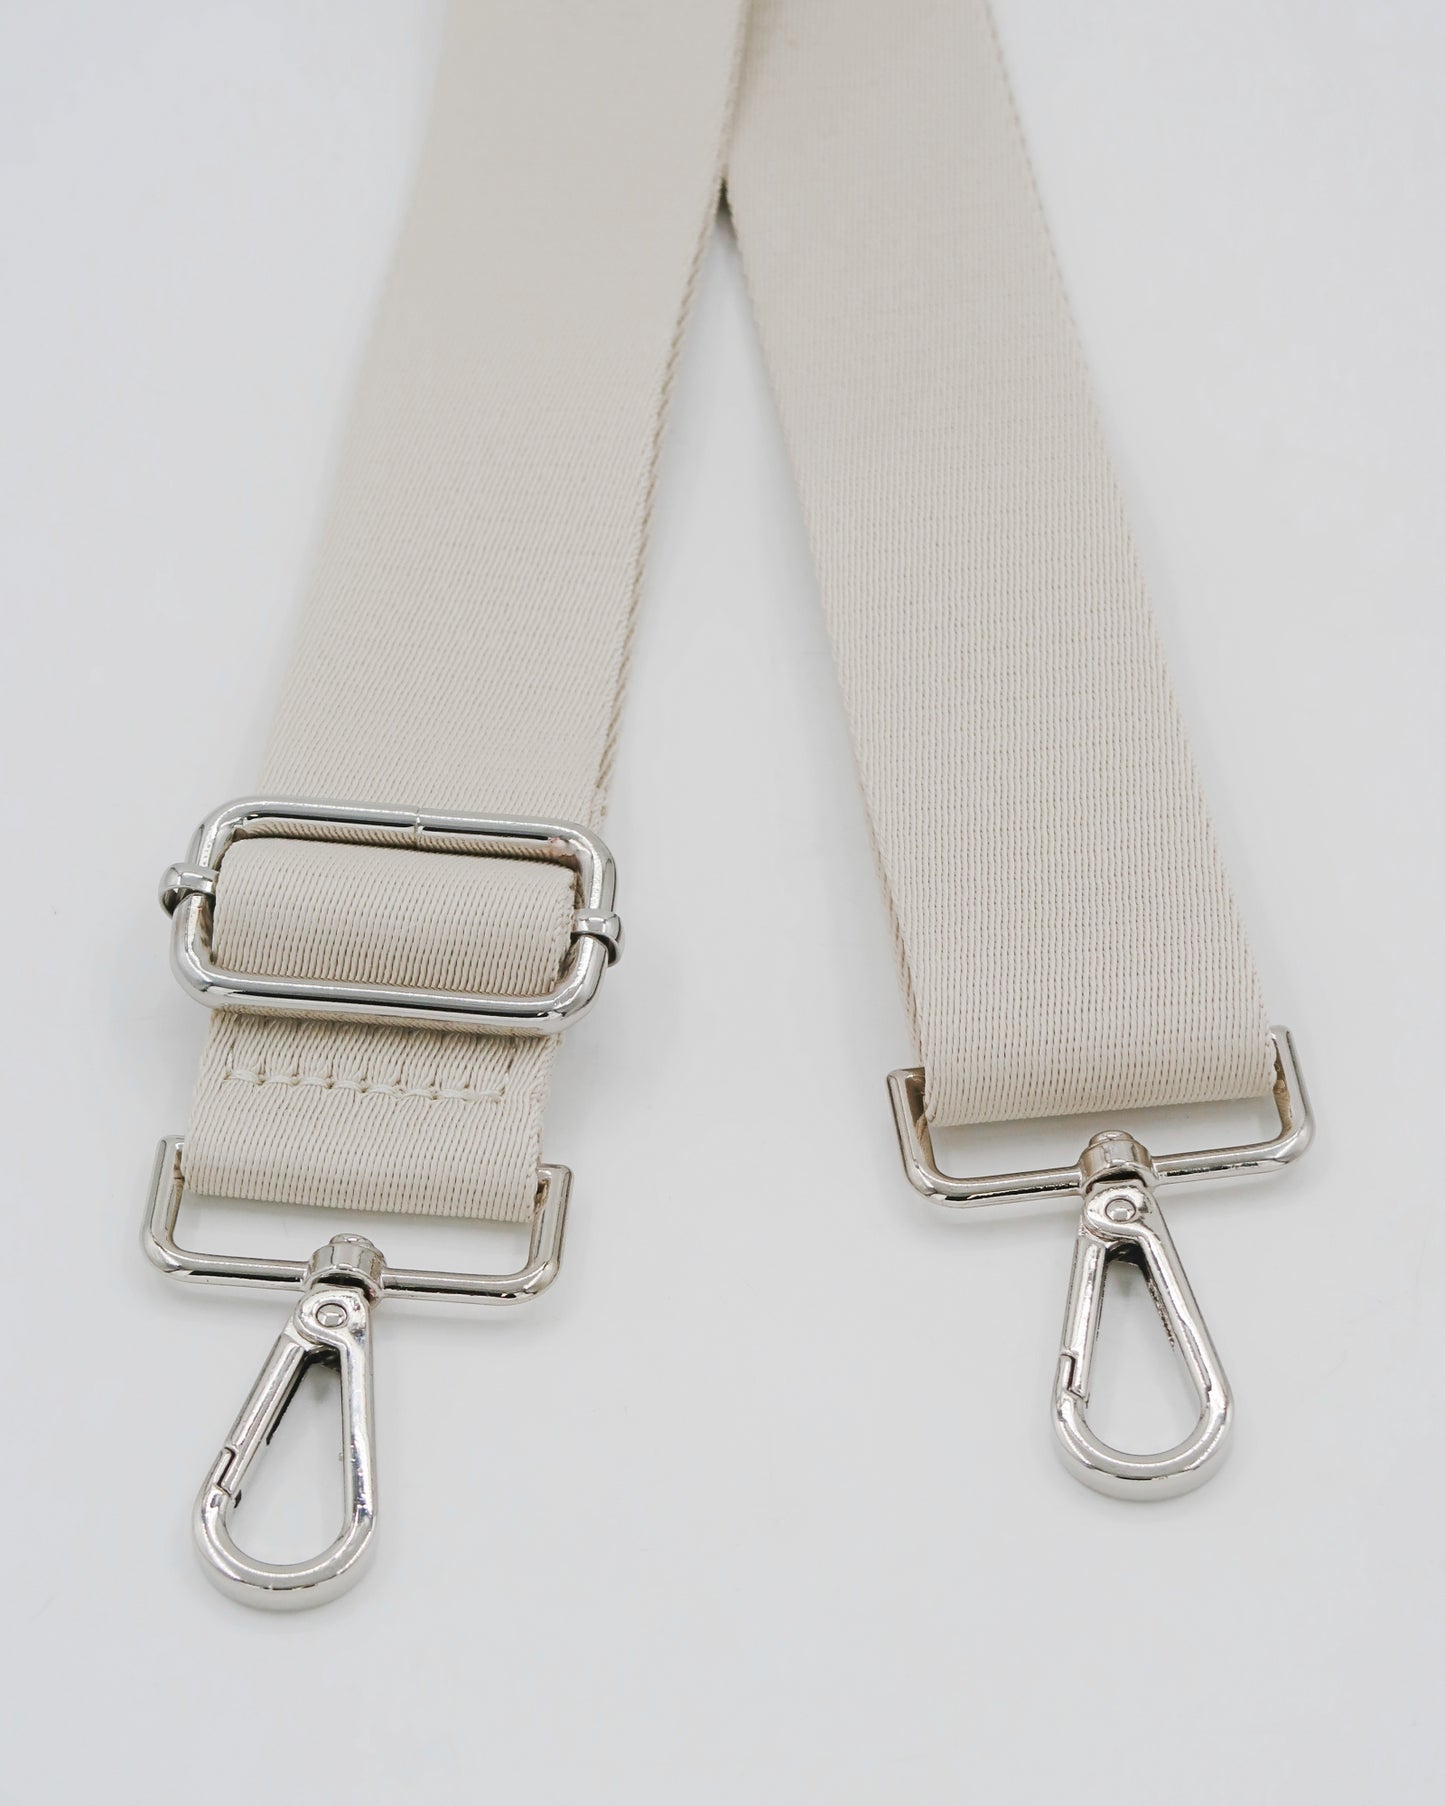 Roman Holiday Bag Strap  - Beige/Silver